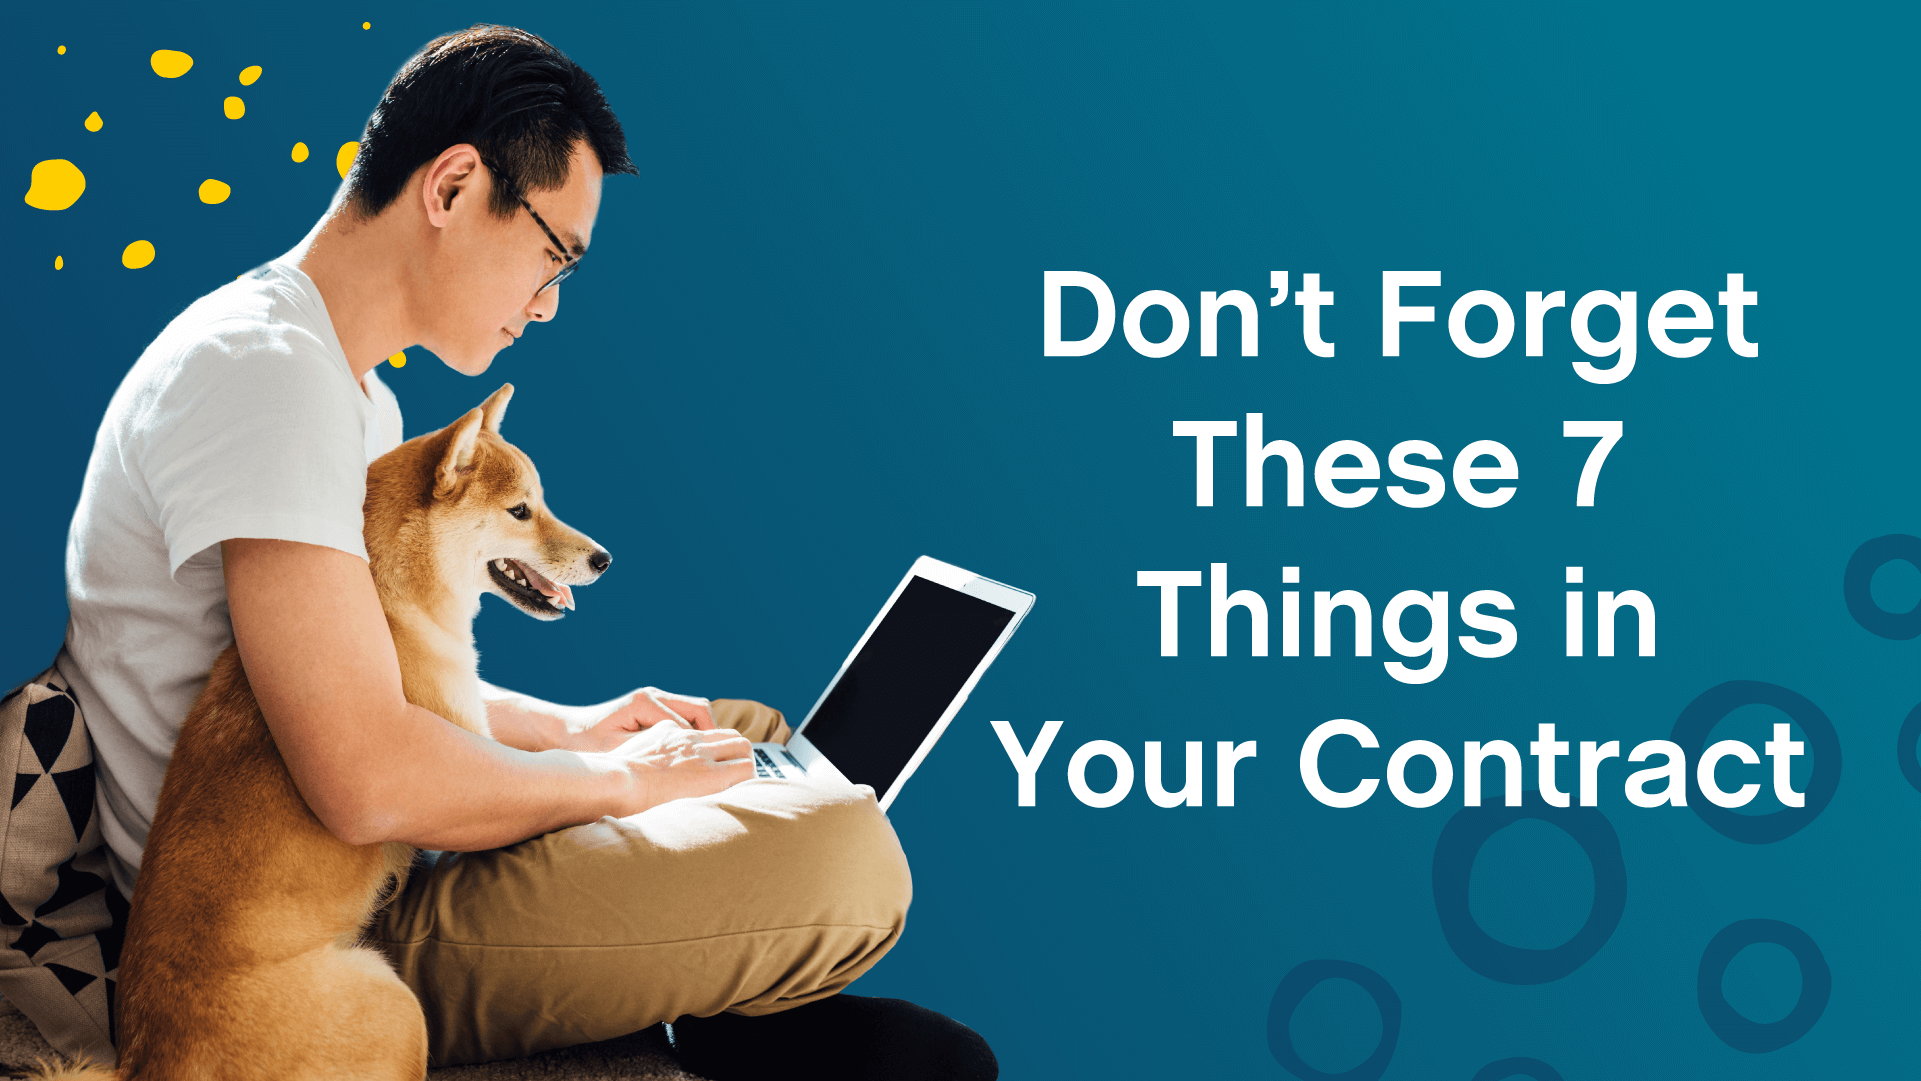 Don’t Forget These 7 Things in Your Contract